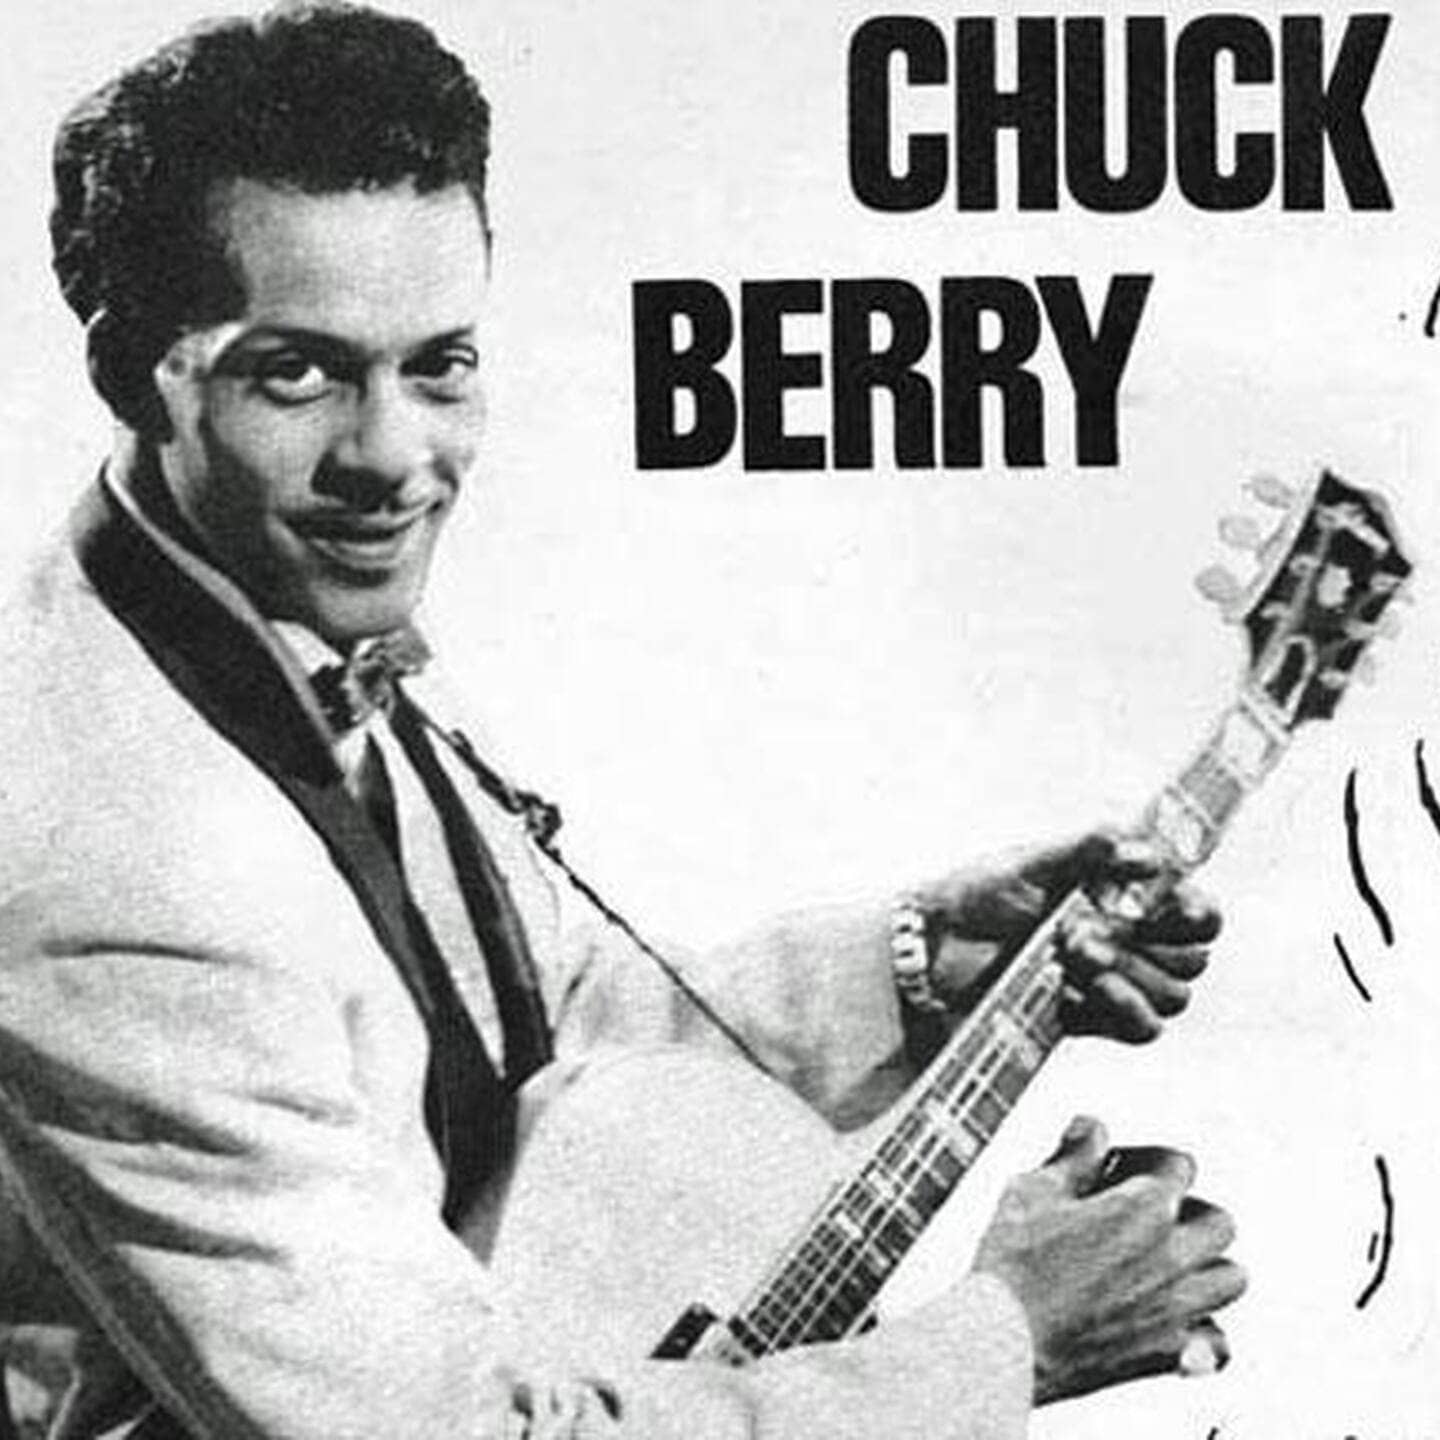 Roll Over Beethoven – Chuck Berry